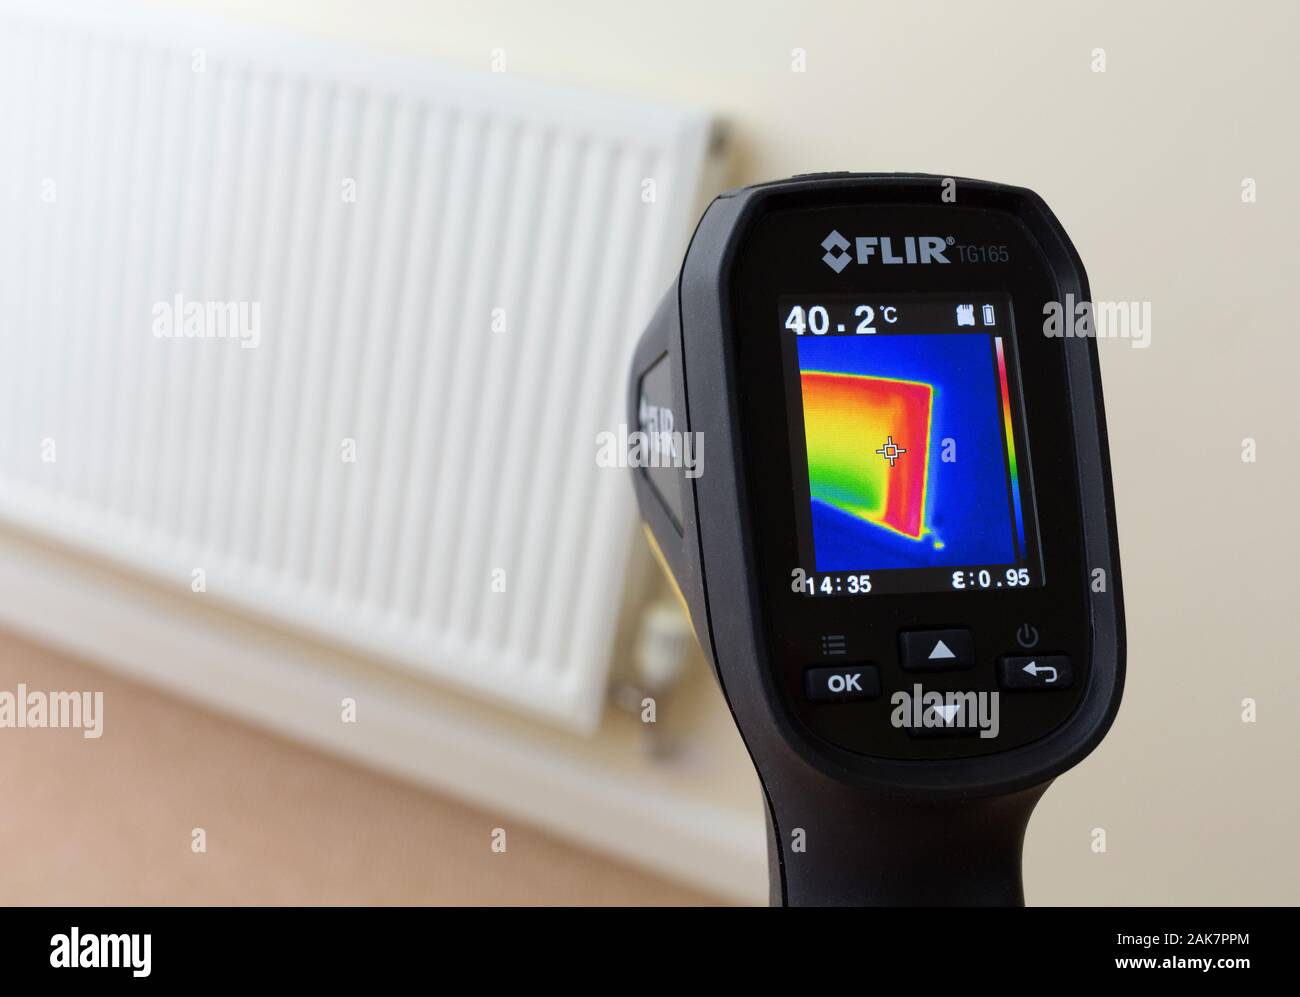 Thermal image camera being used to check temperature of domestic heating radiator in home Stock Photo